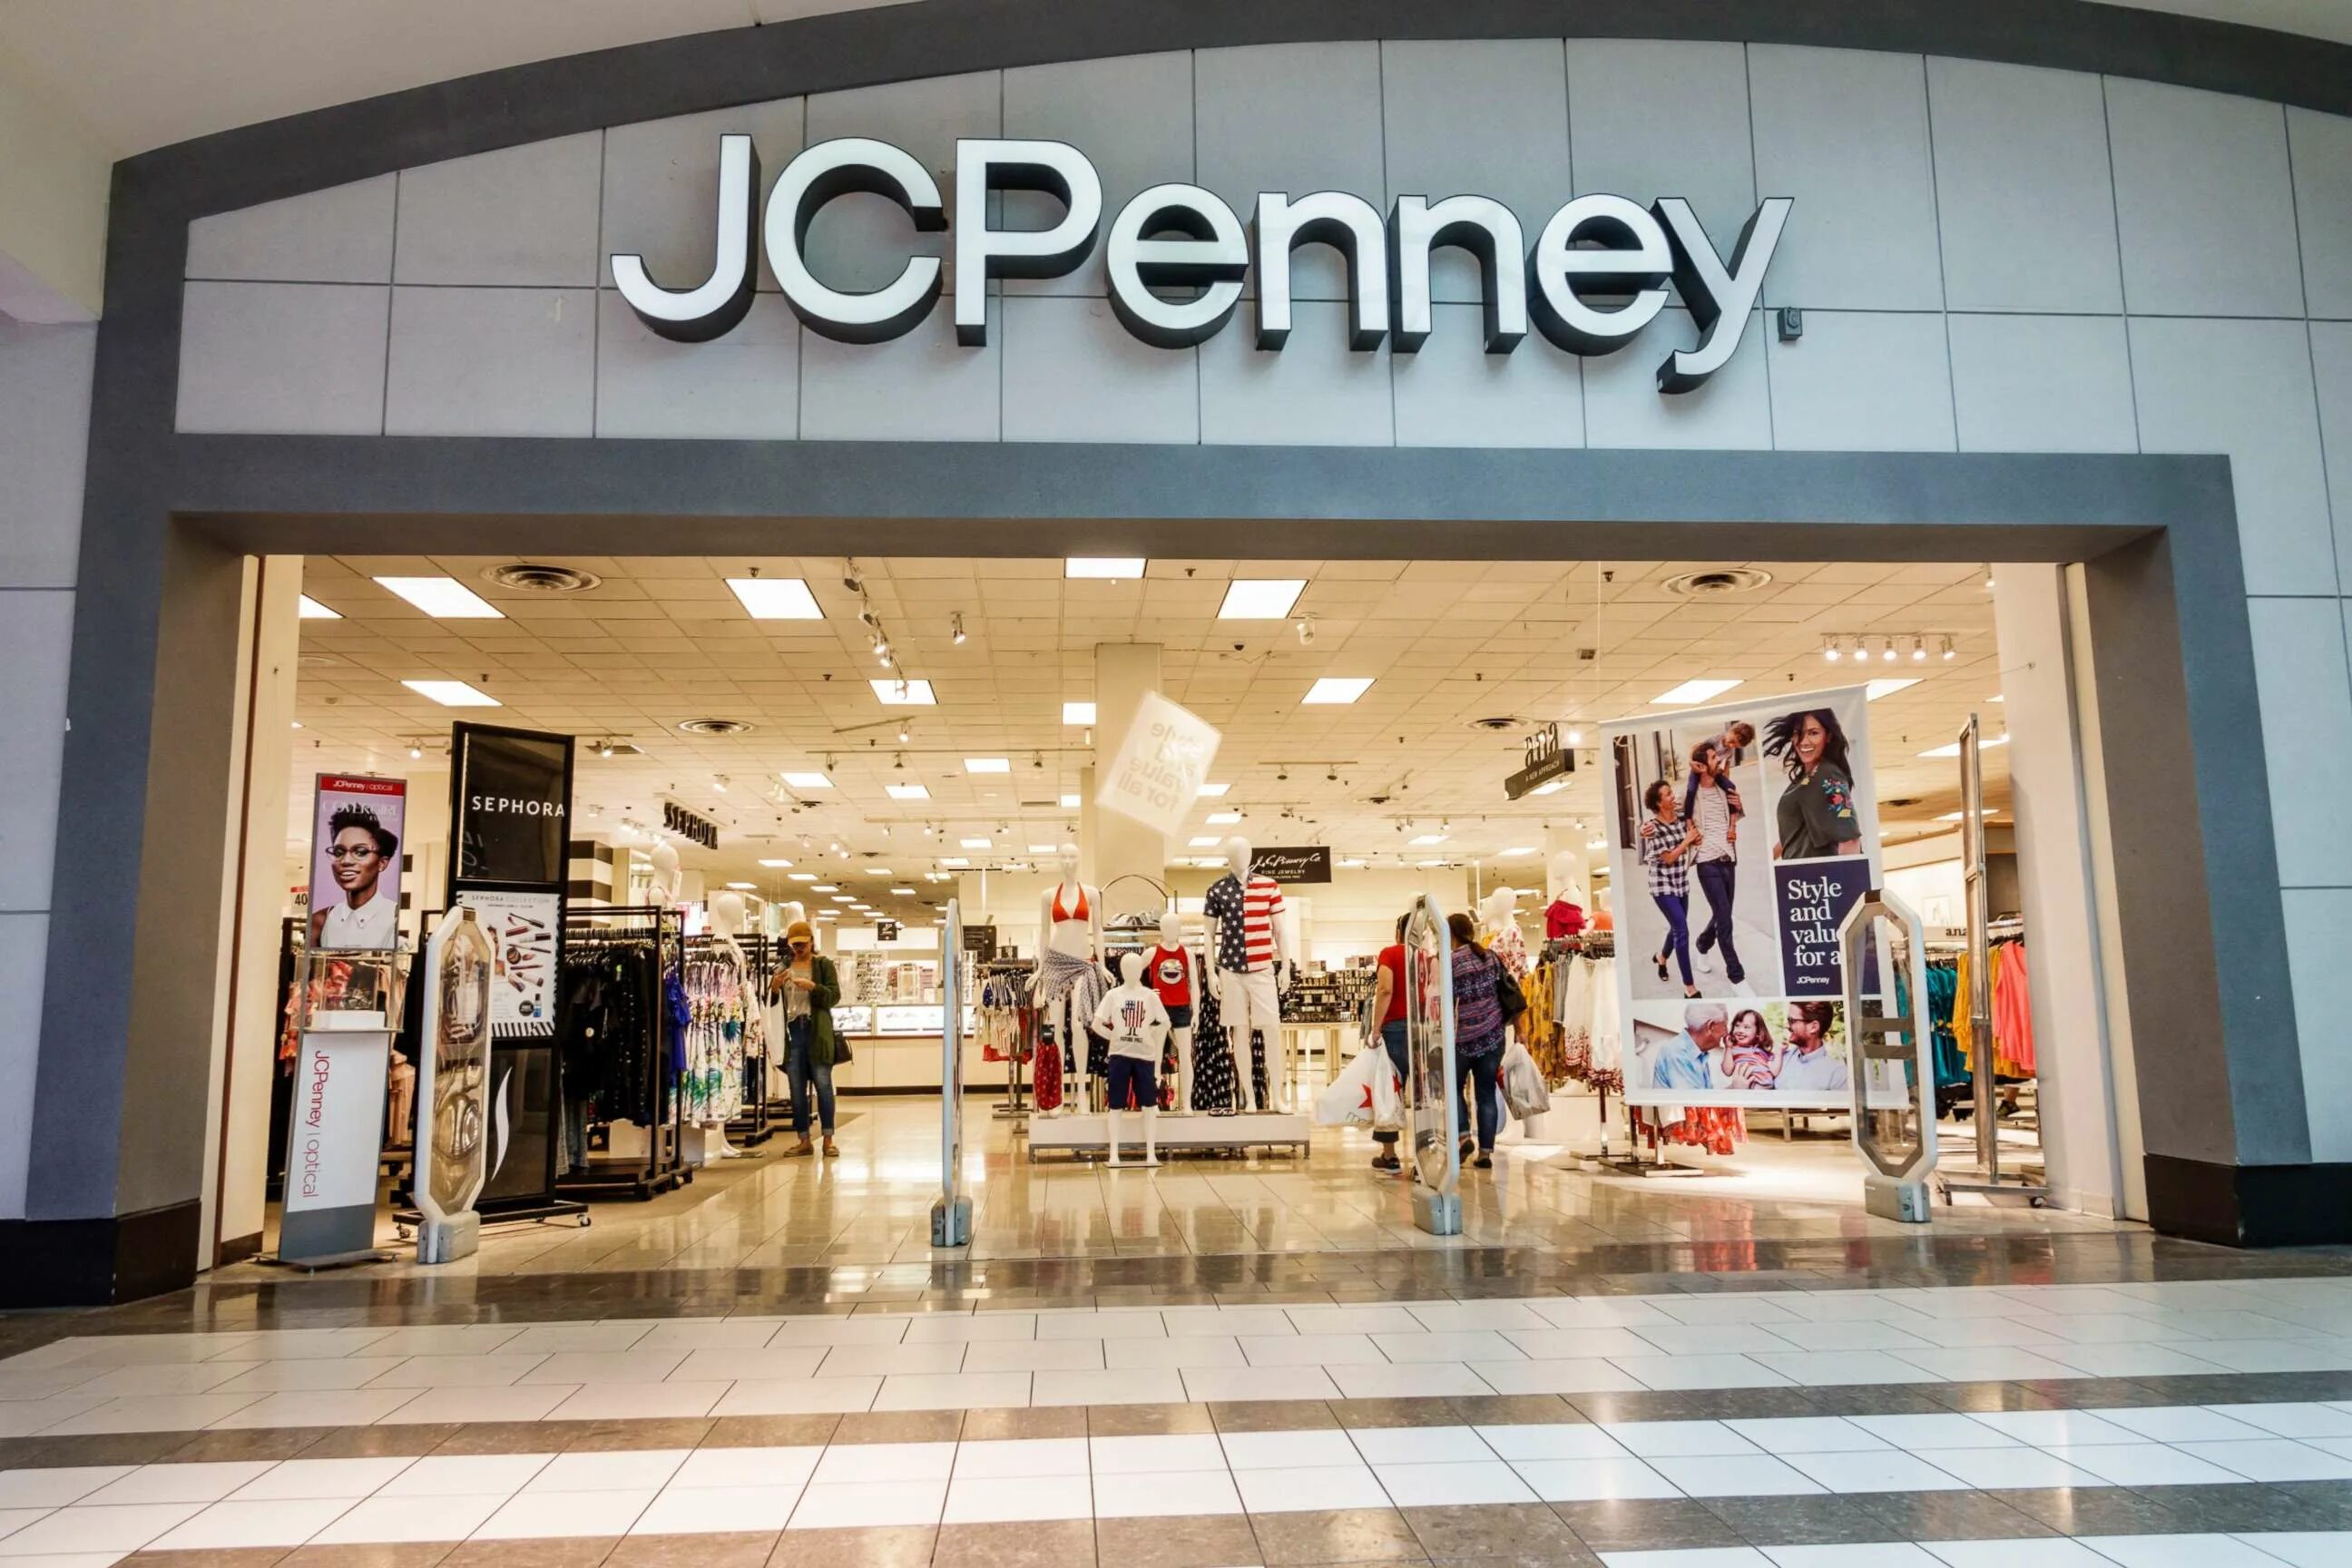 Jcpenney. Jcpenney компании. Jcpenney Store. JC Penney Company.